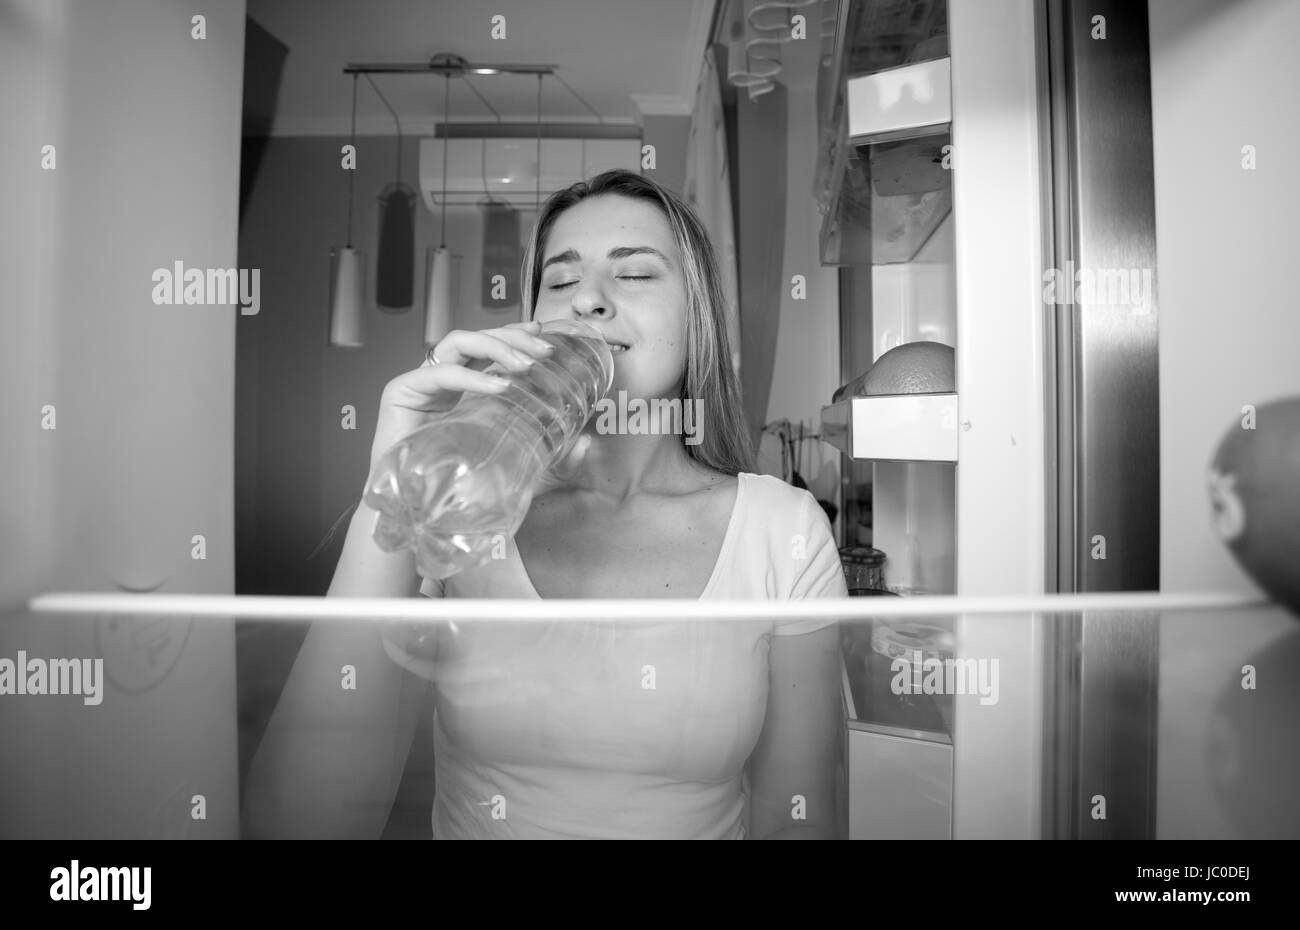 Black and white portrait of beautiful smiling woman taking water from fridge and drinking it. View from inside of open refrigerator Stock Photo